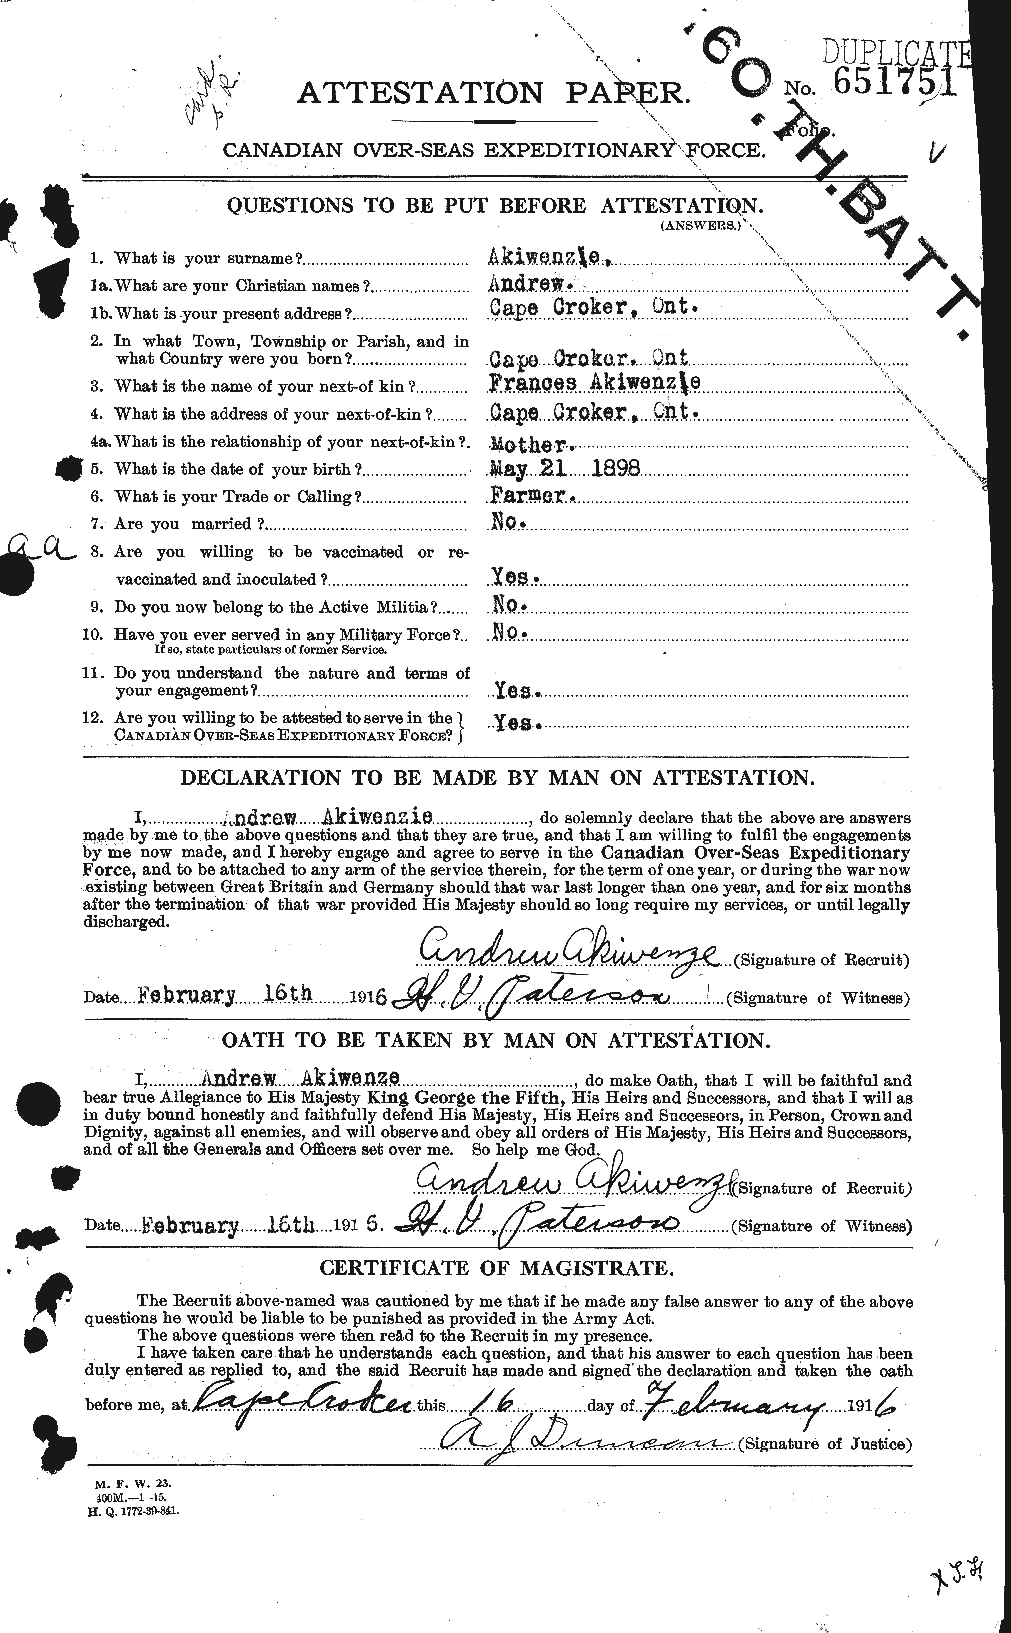 Personnel Records of the First World War - CEF 203588a